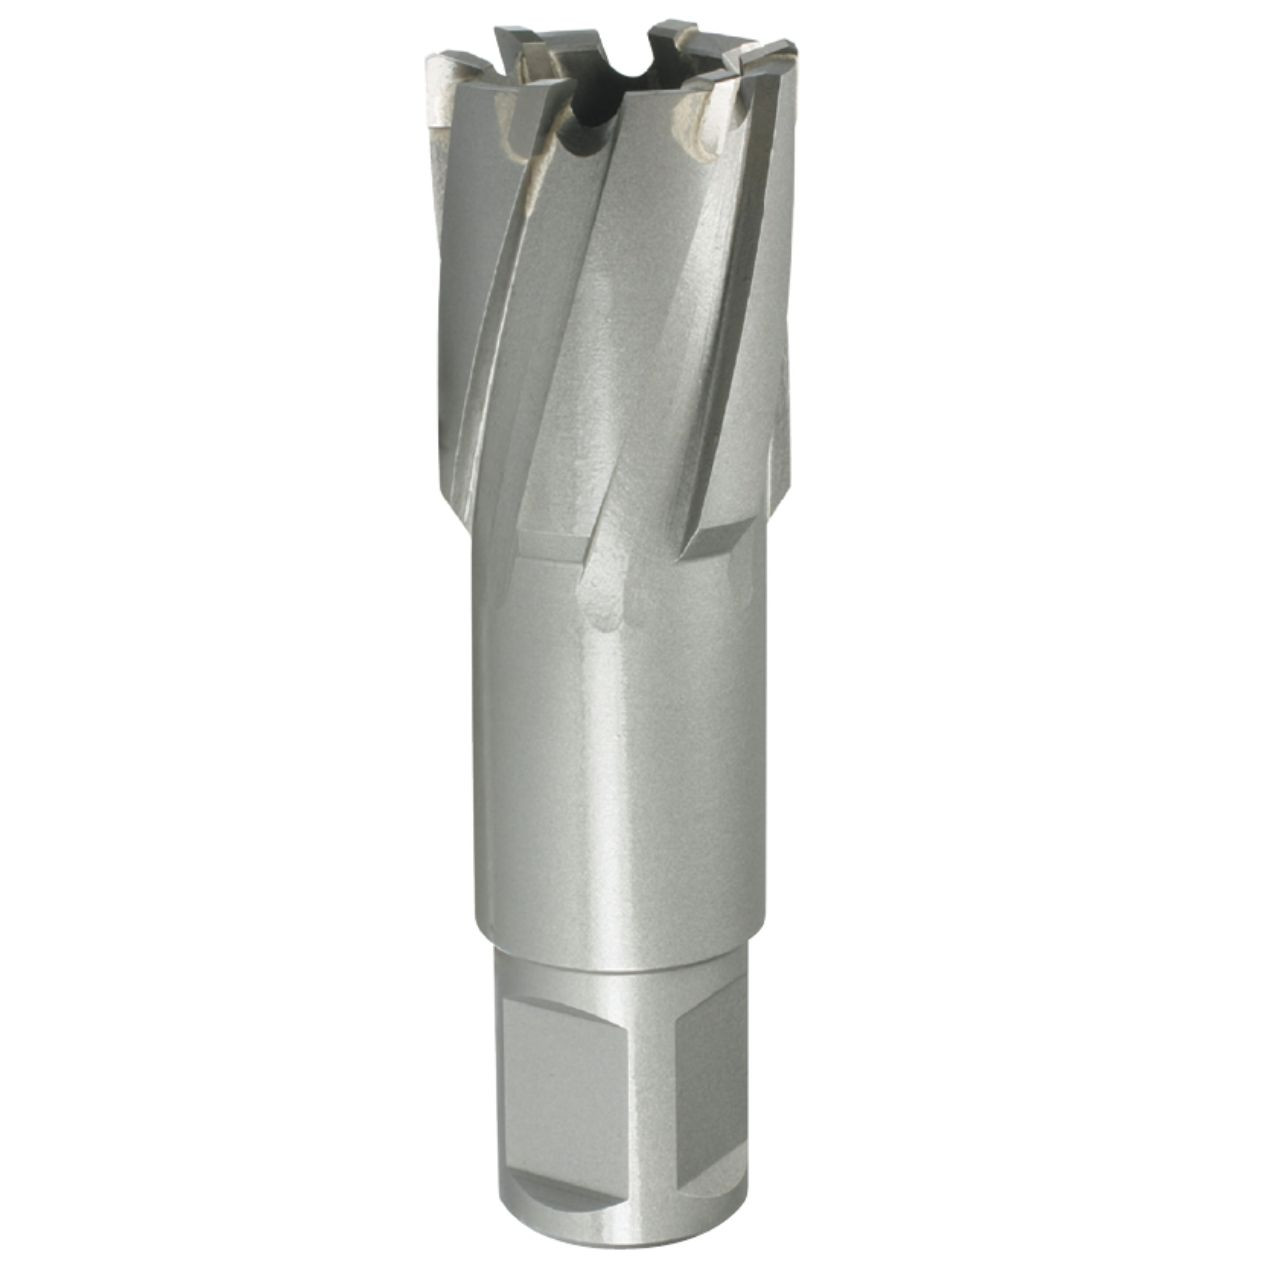 19 X 50 TCT Excision Core Drill